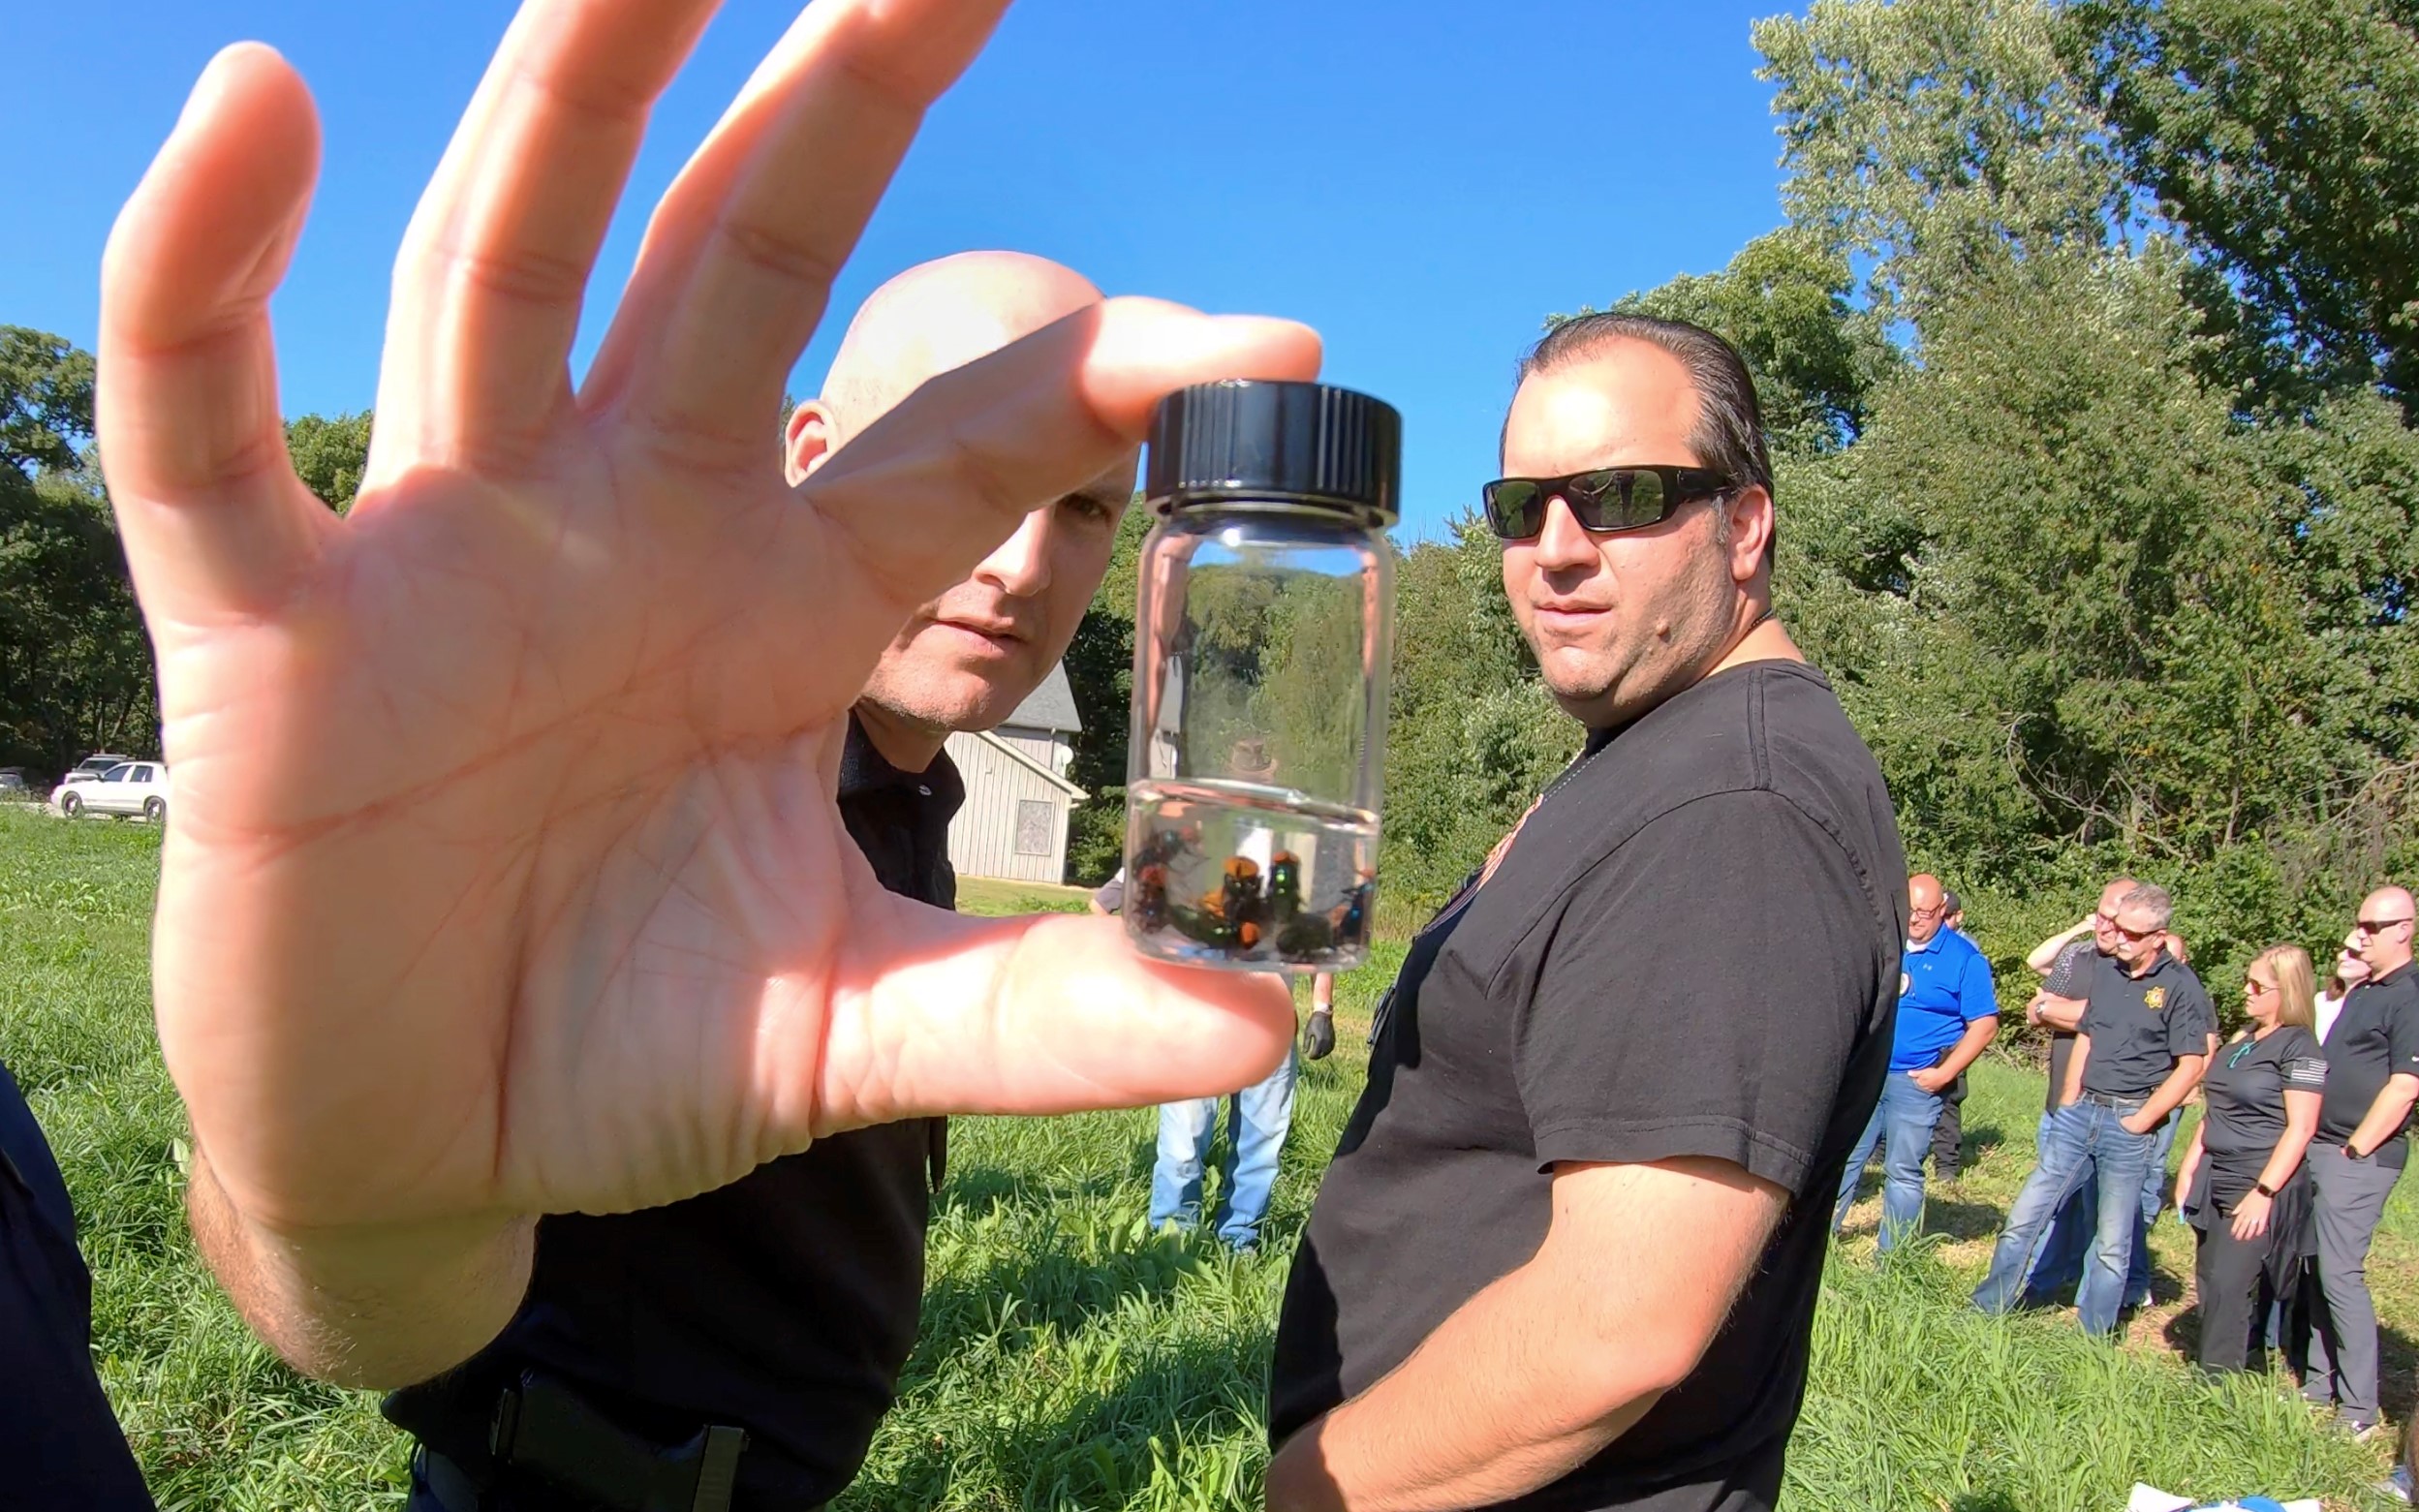 Forensic entomology workshop hosted by the Forest Preserve's police department.